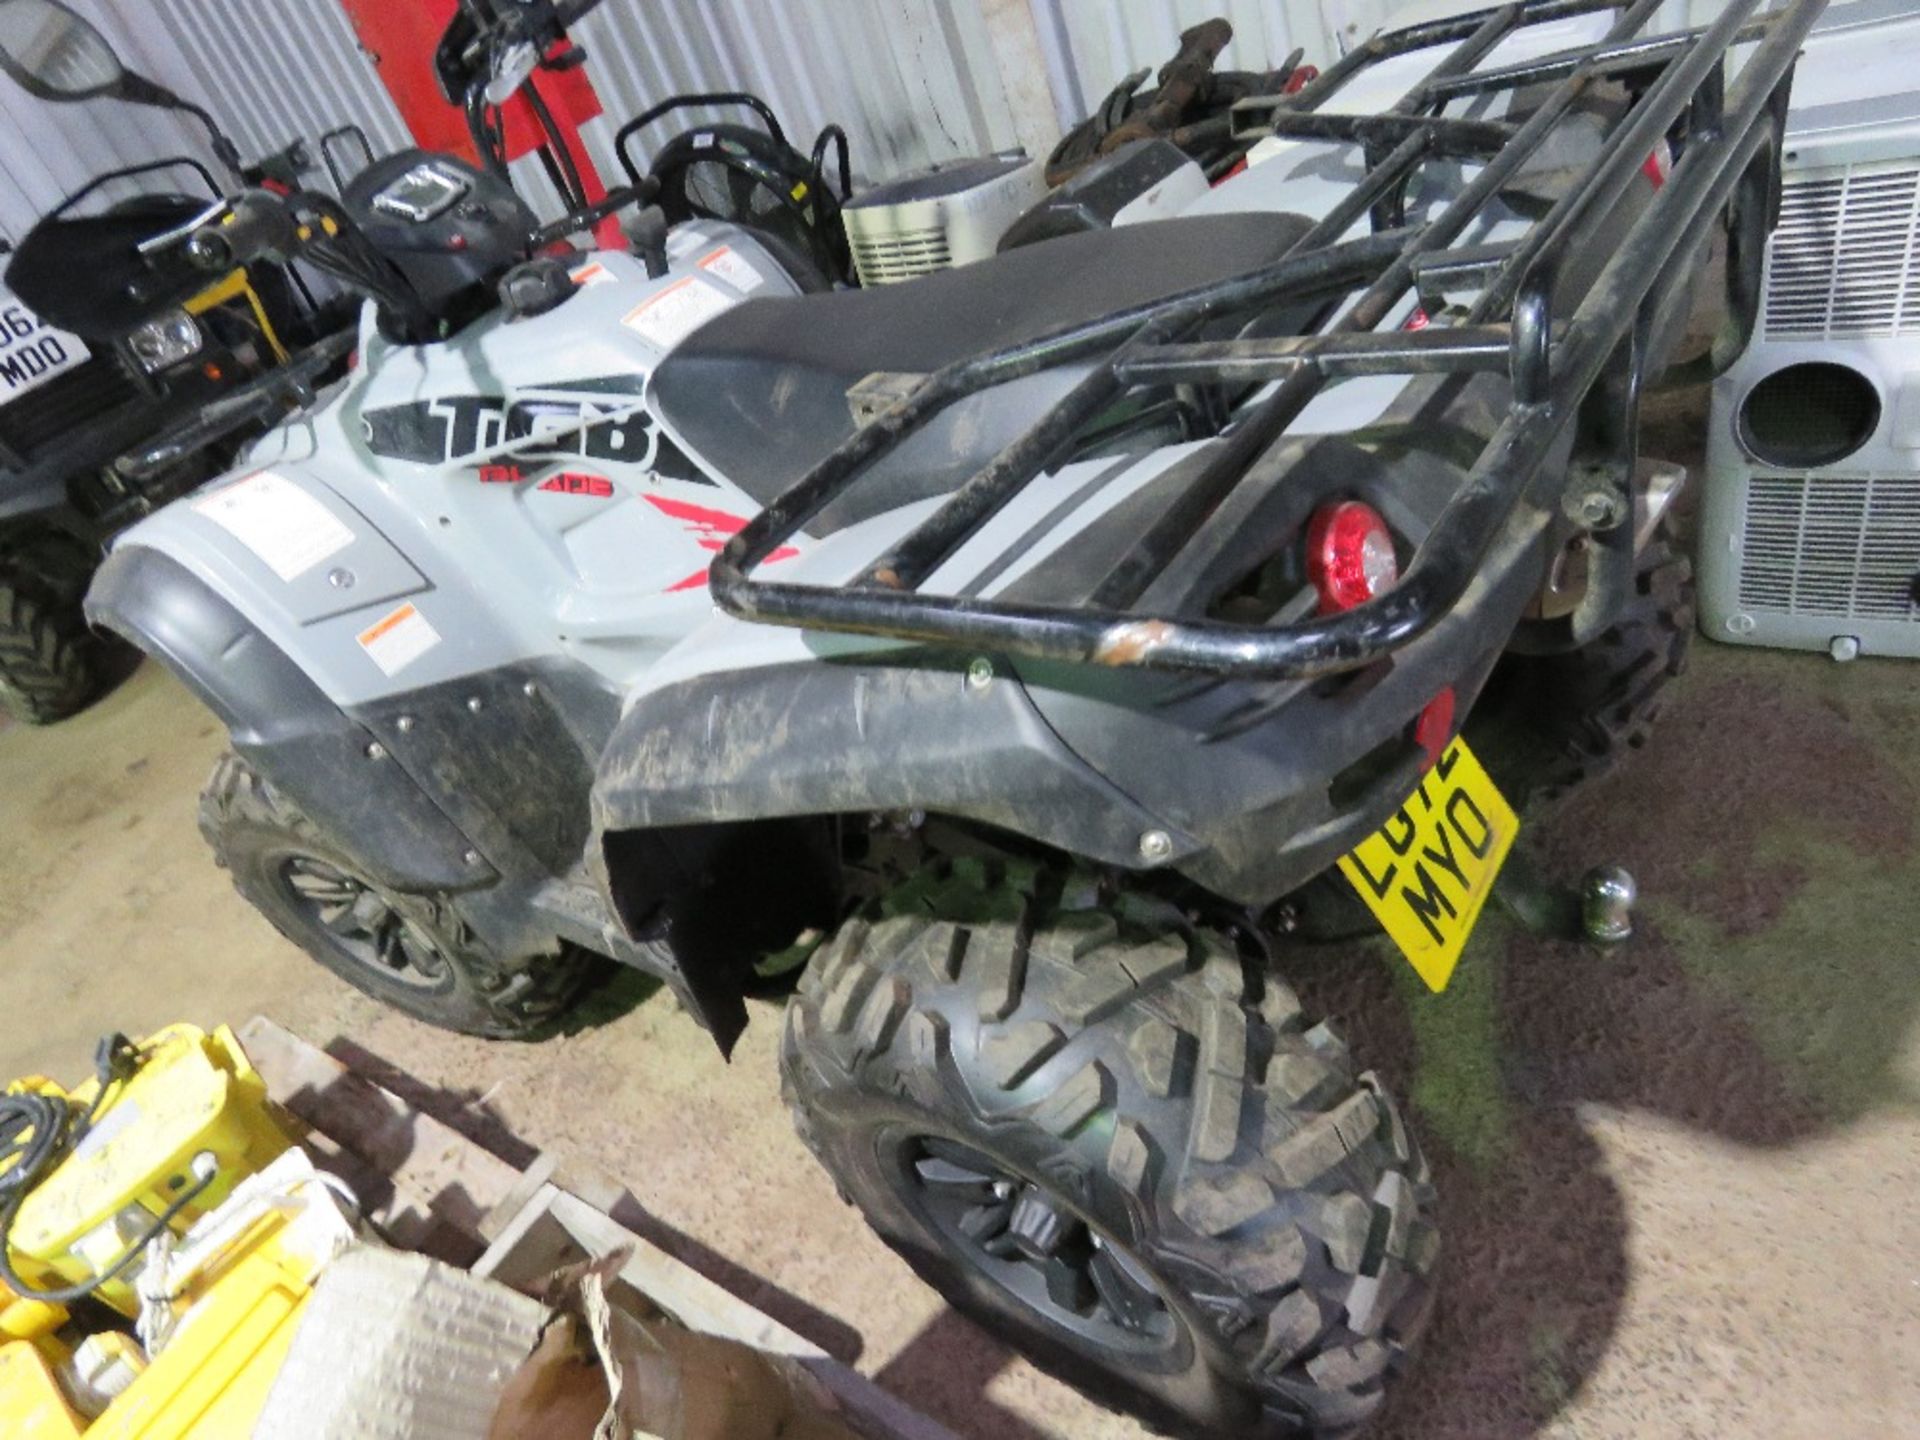 TGB BLADE 520SL EPS 4WD QUAD BIKE, 164 REC MILES FROM NEW. REG:LG72 MYO. WHEN TESTED WAS SEEN TO STA - Image 5 of 7